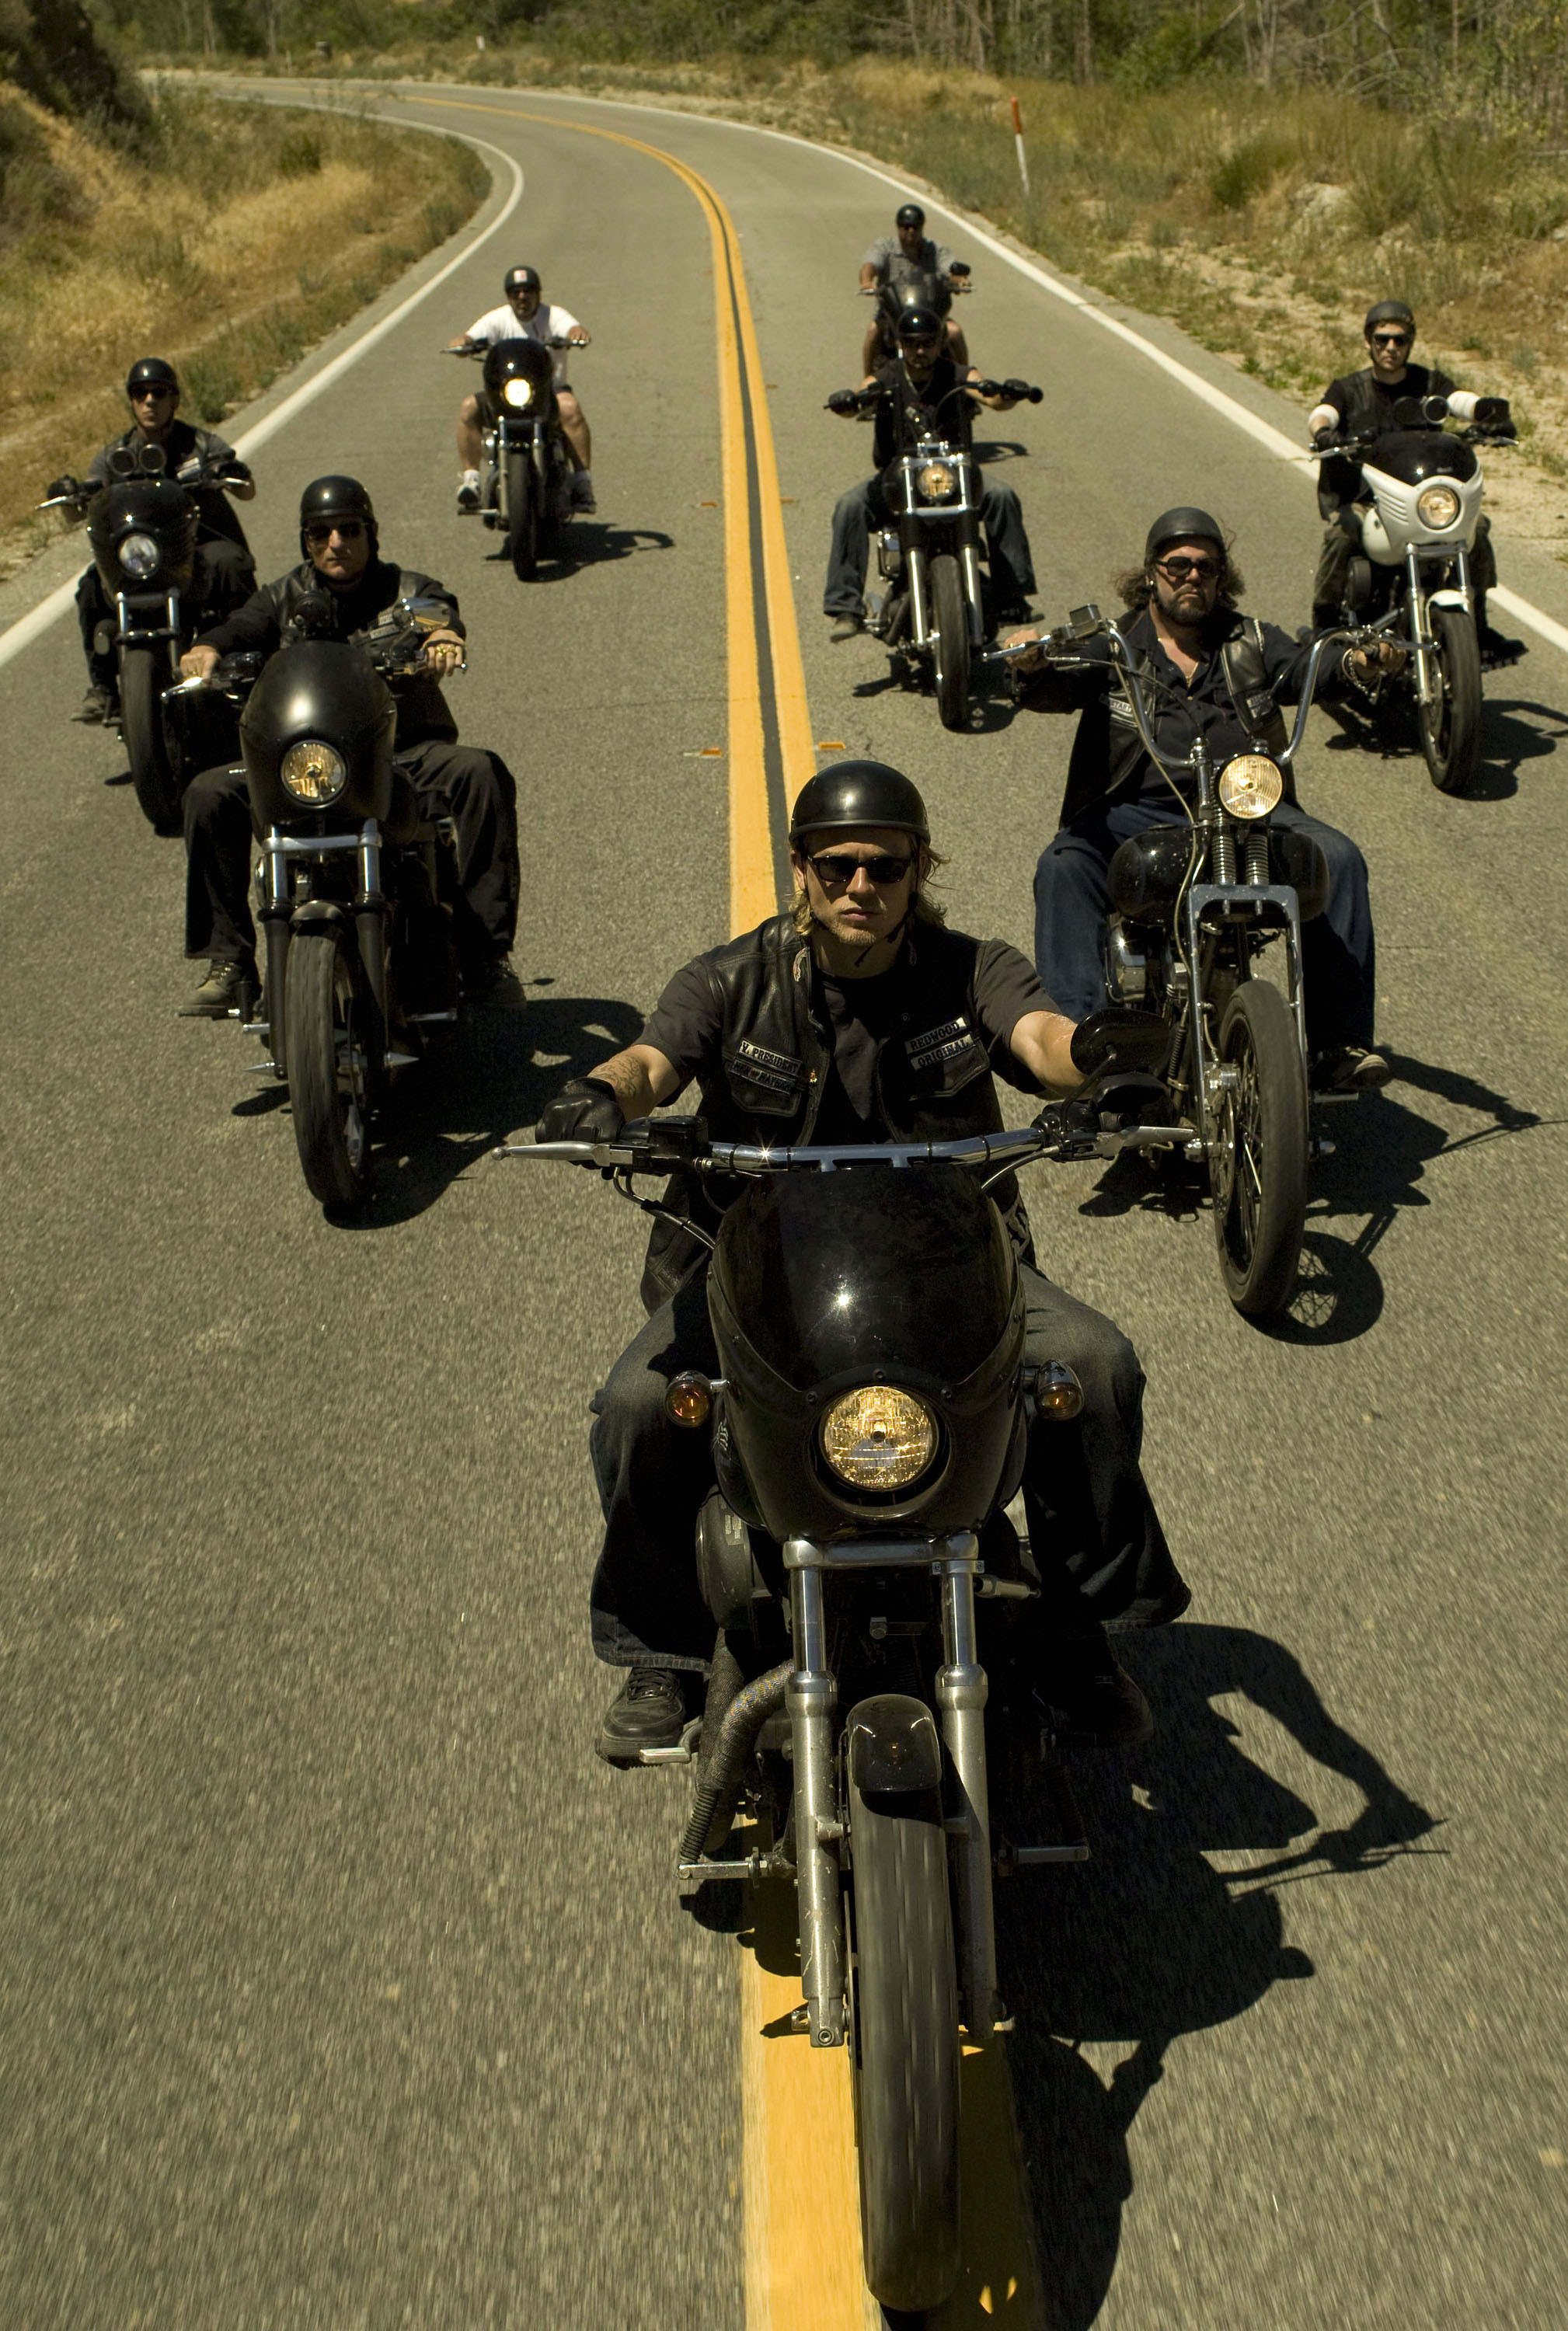 Sons of Anarchy Wallpaper iPhone